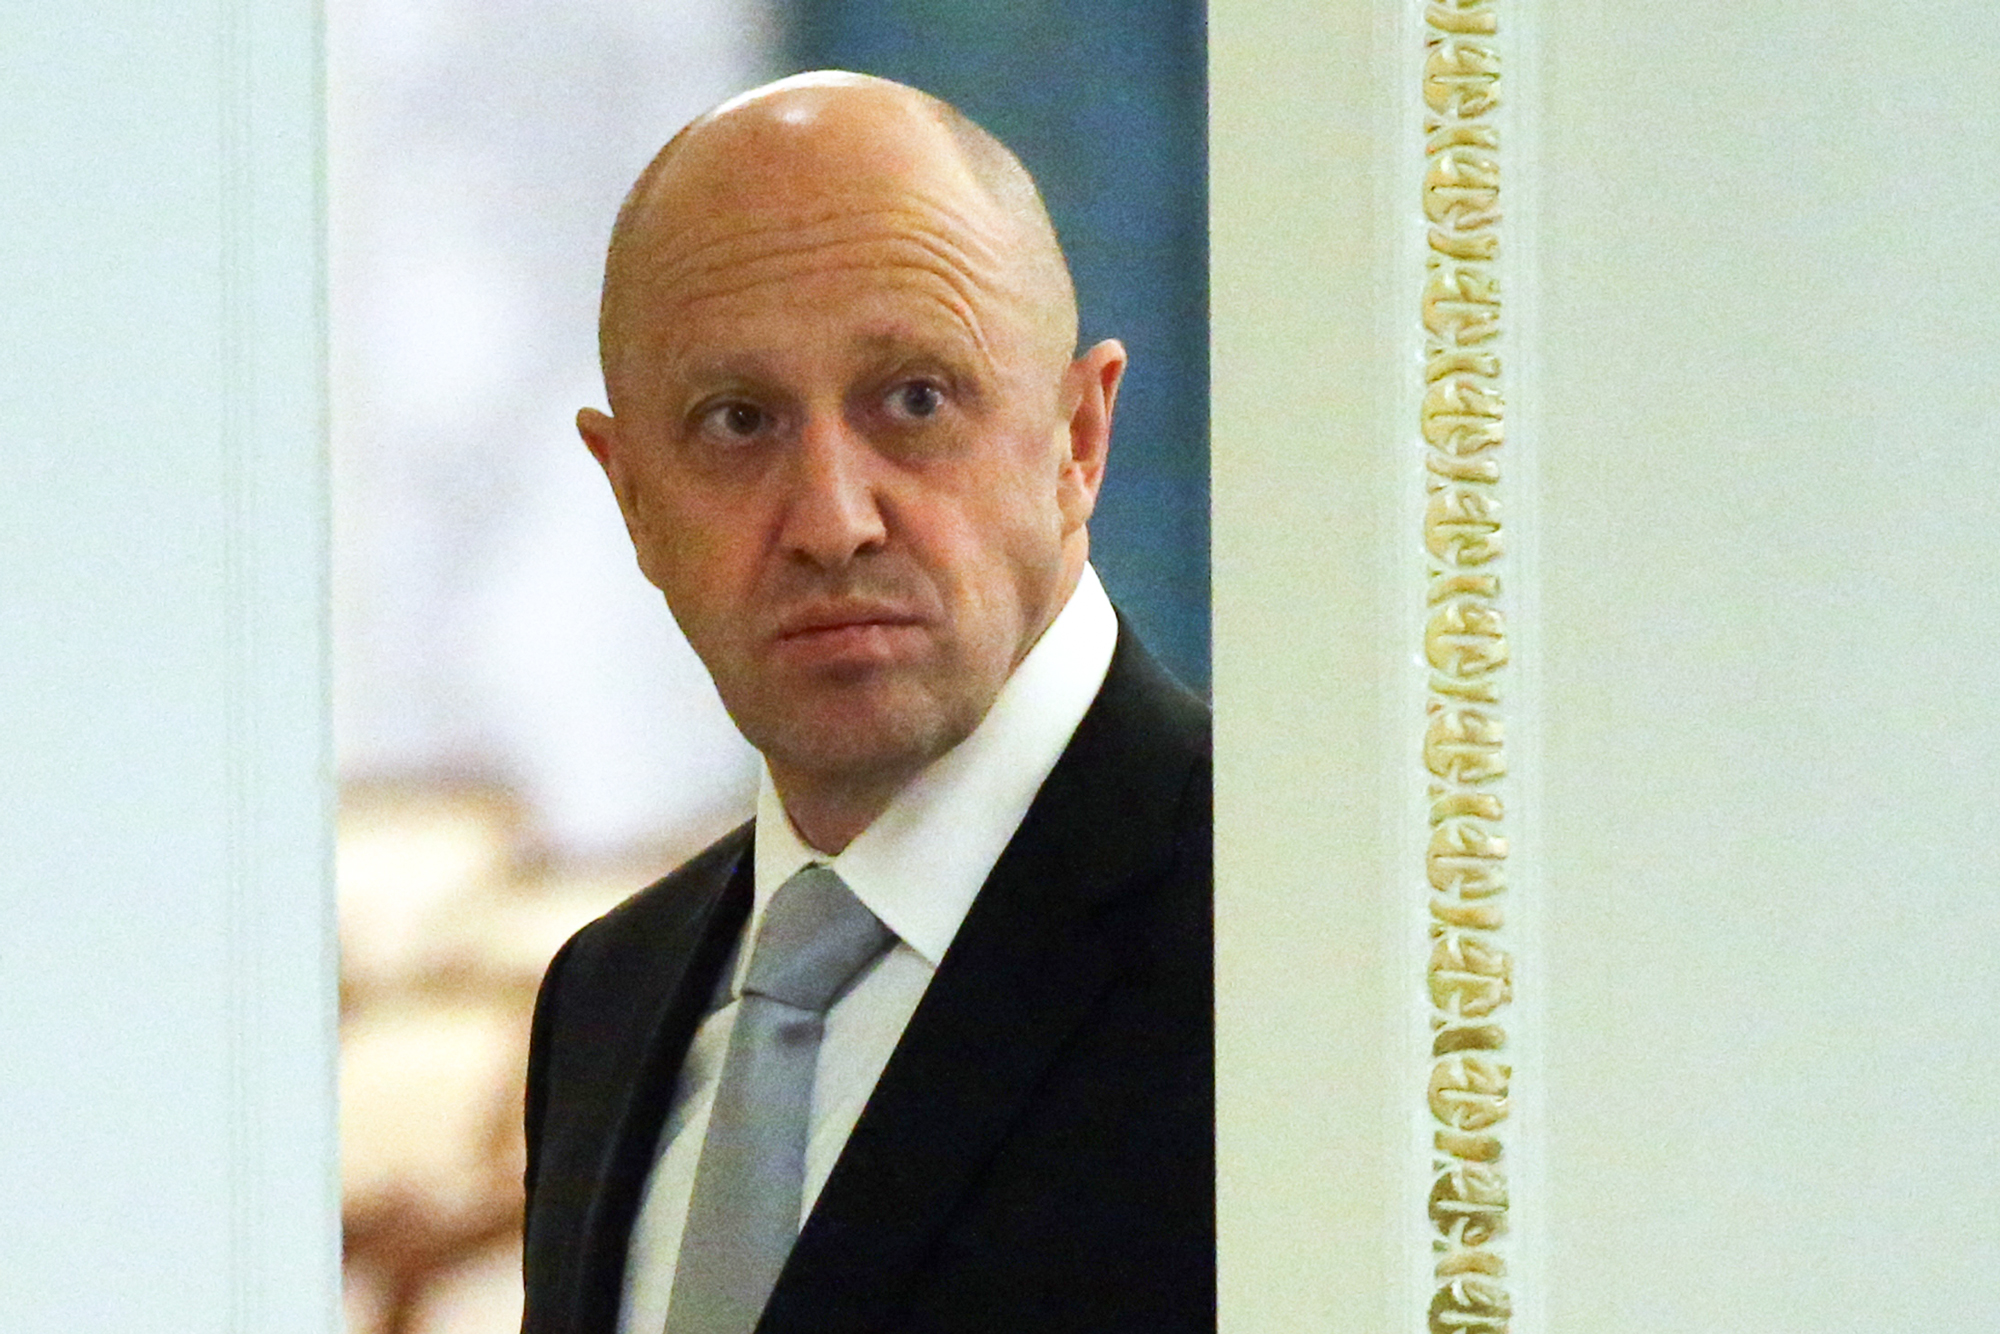 Prigozhin allies urge Wagner fighters to disobey orders for “war” on Russia